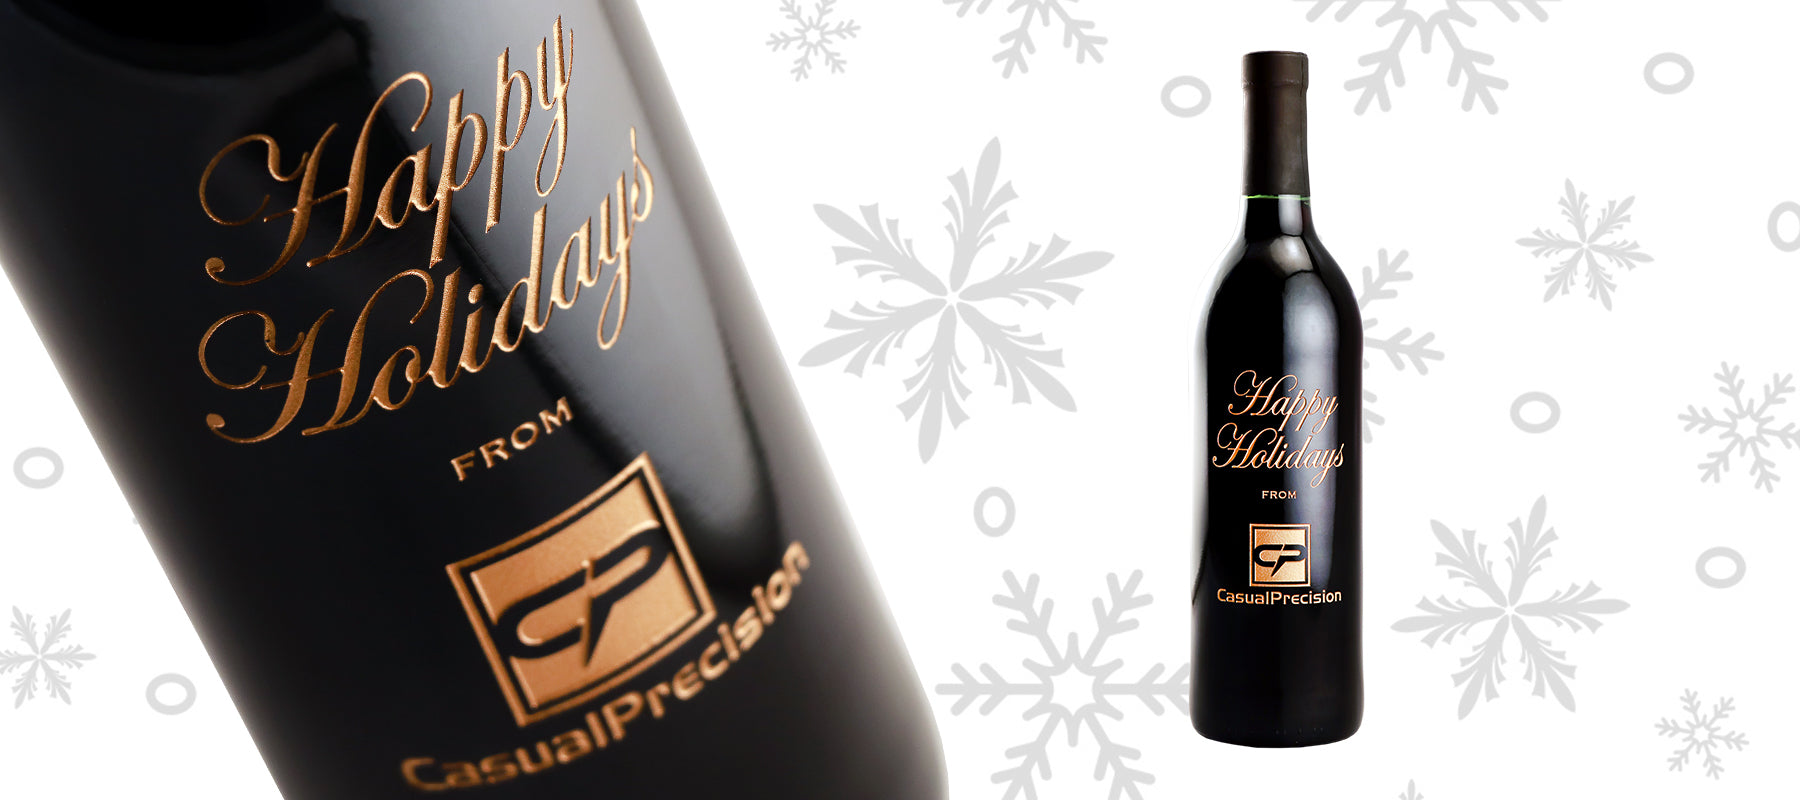 Happy Holidays custom etched wine company Christmas gift by Etching Expressions